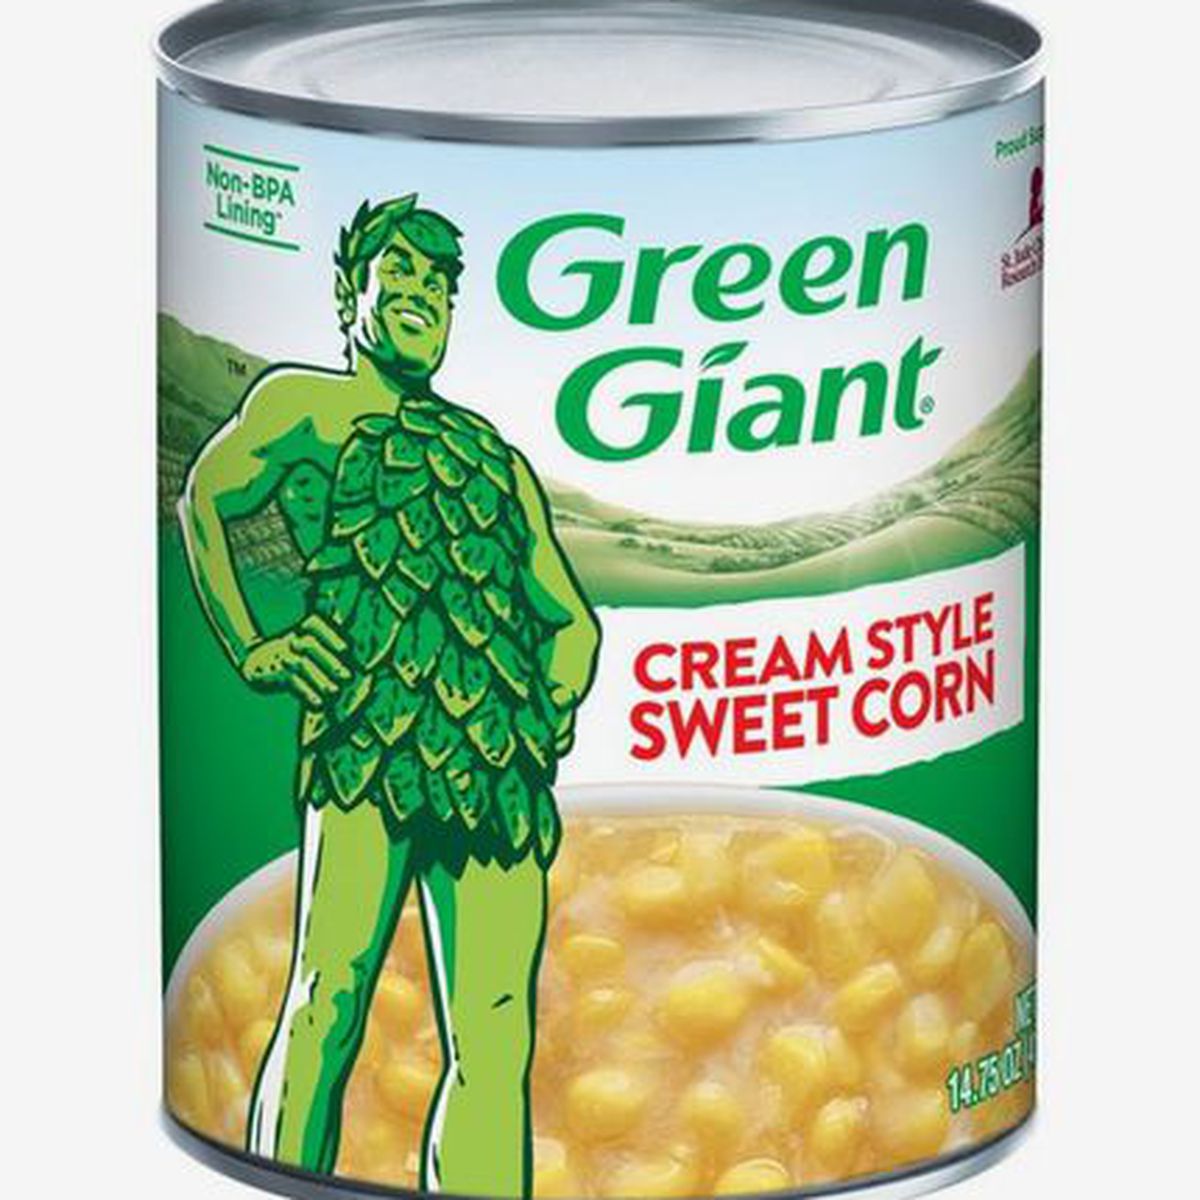 A can of Green Giant cream style sweet corn